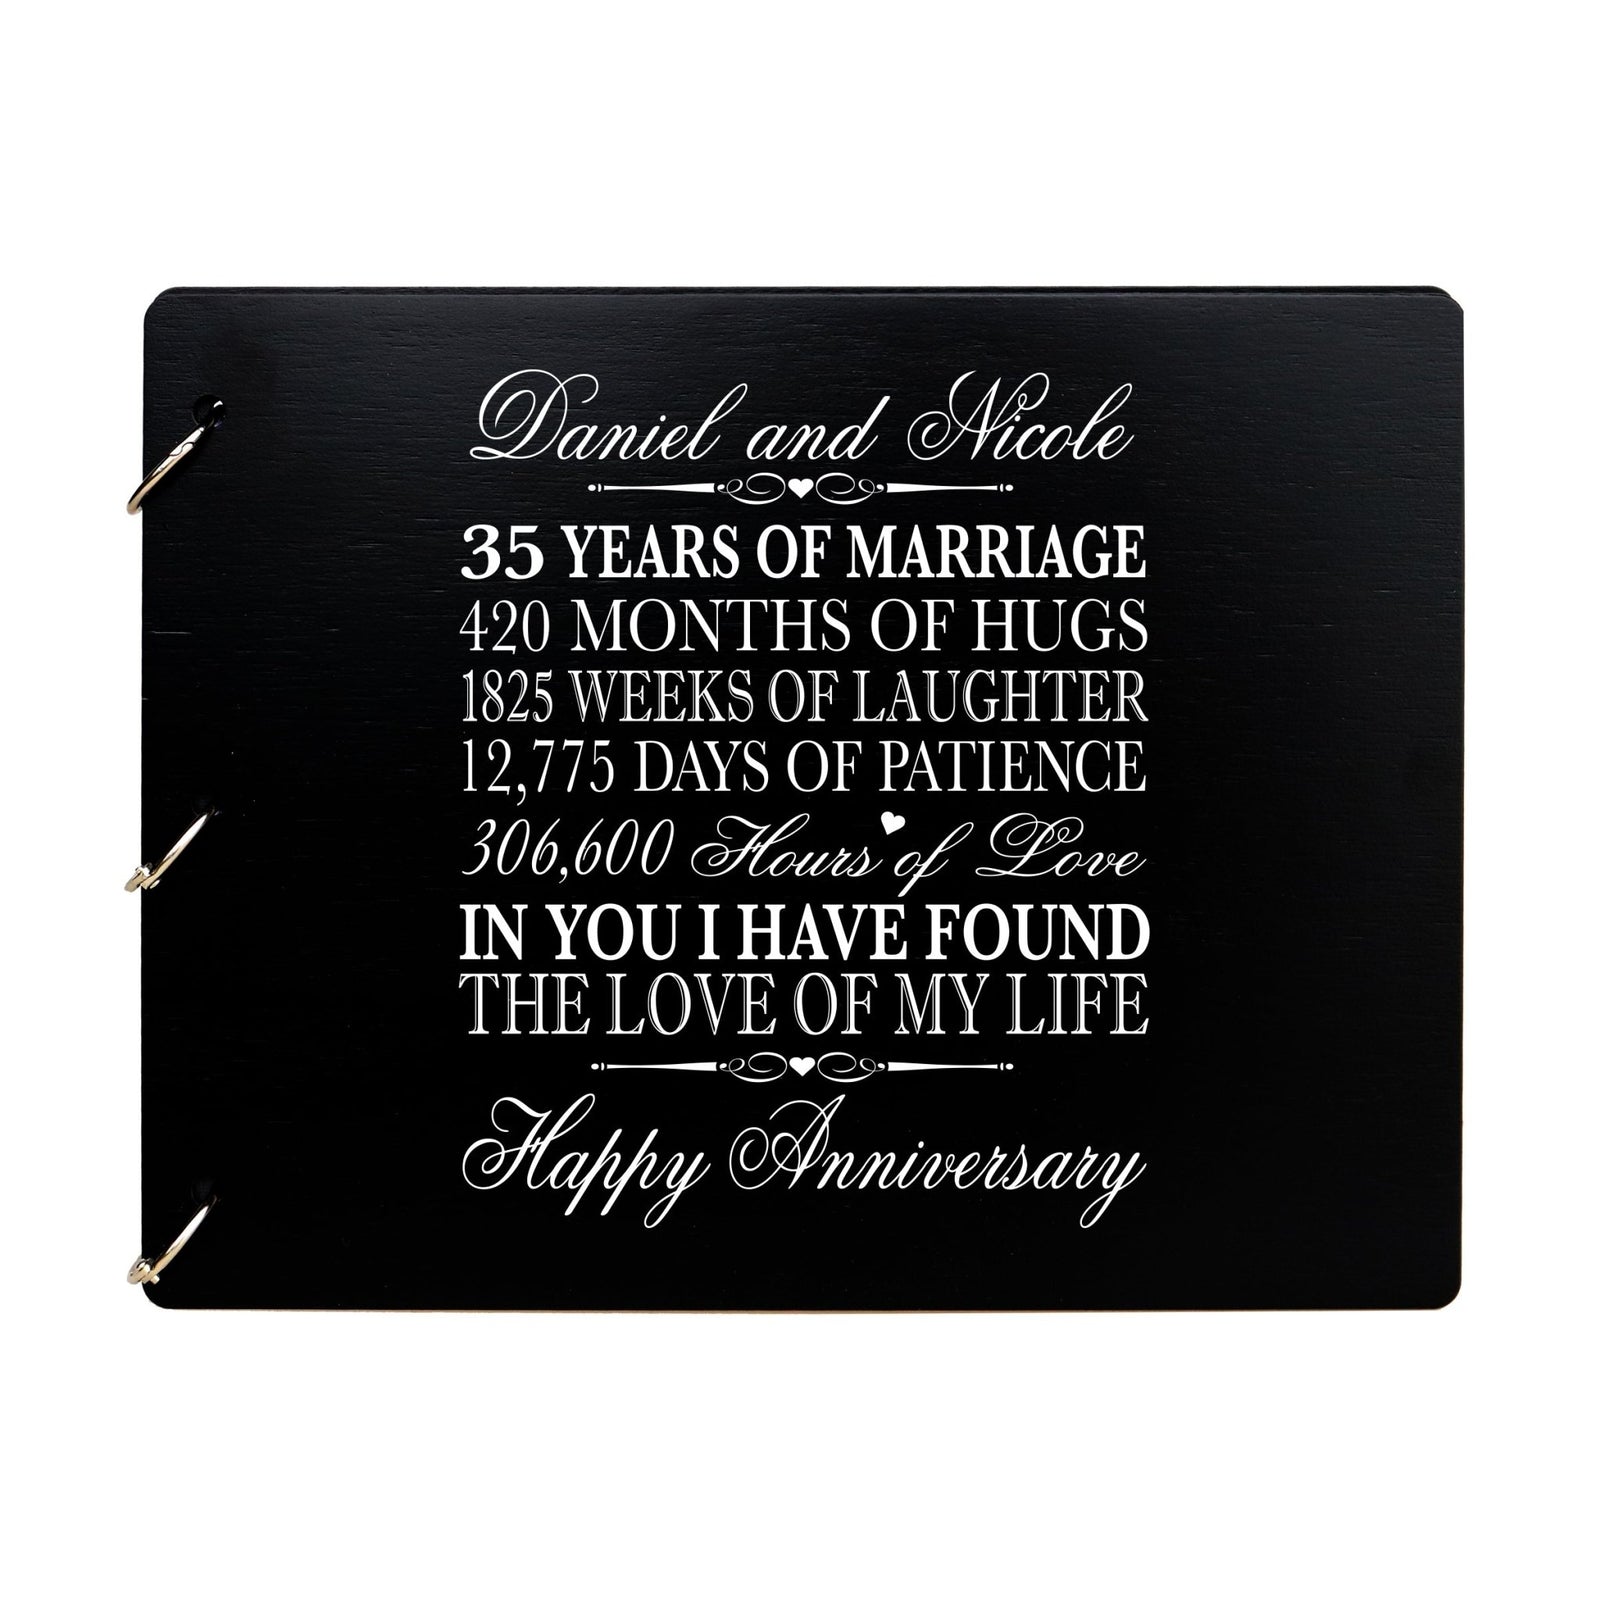 Personalized Guest Book Sign for 35th Wedding Anniversary - Love of My Life - LifeSong Milestones